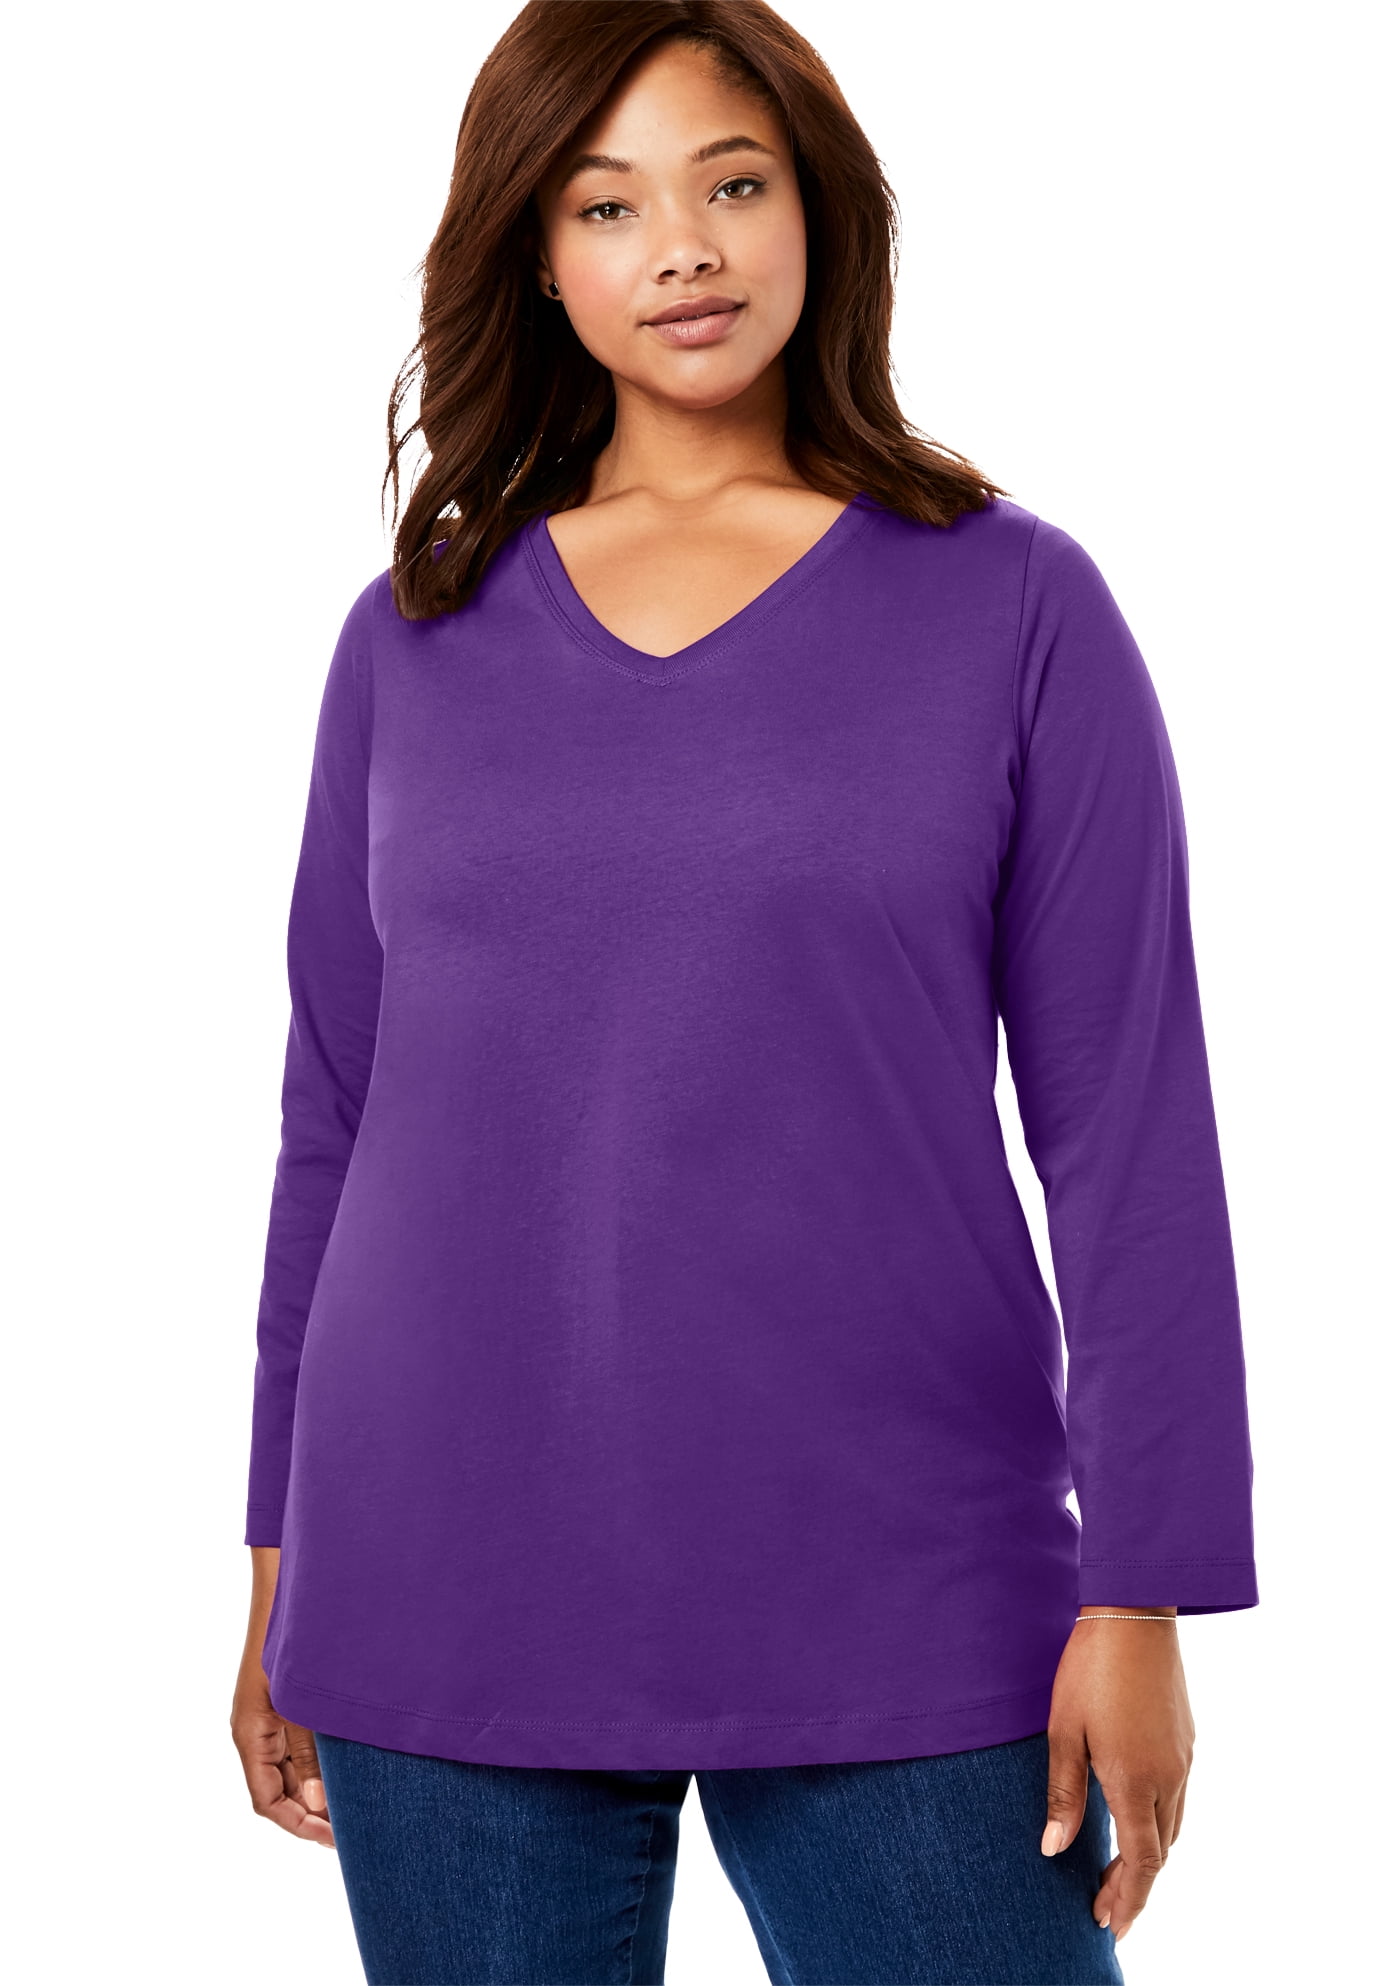 Woman Within Plus Size Perfect V-neck Long Sleeve Tee T-Shirt - Walmart.com